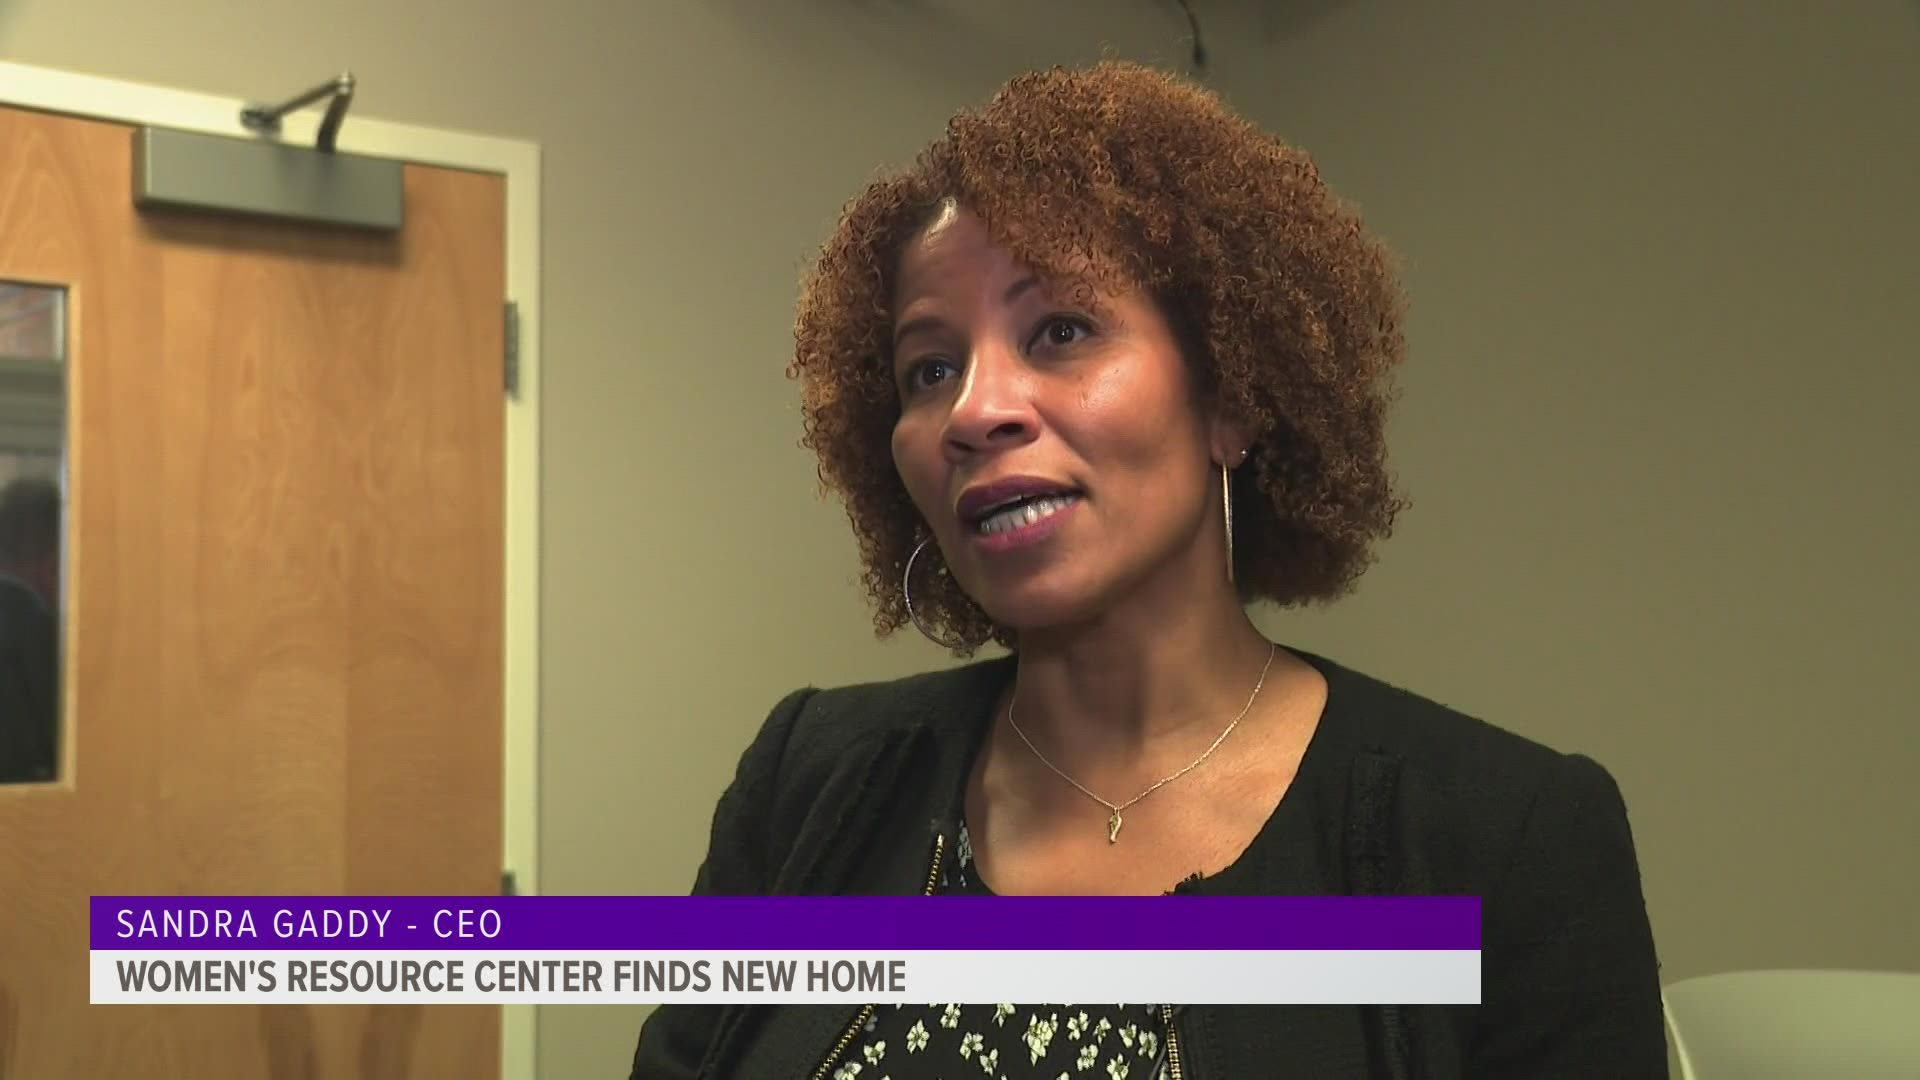 The Women's Resource Center has found a new home at 816 Madison Avenue SE in Grand Rapids and has launched a fundraising program to raise funds for the move.